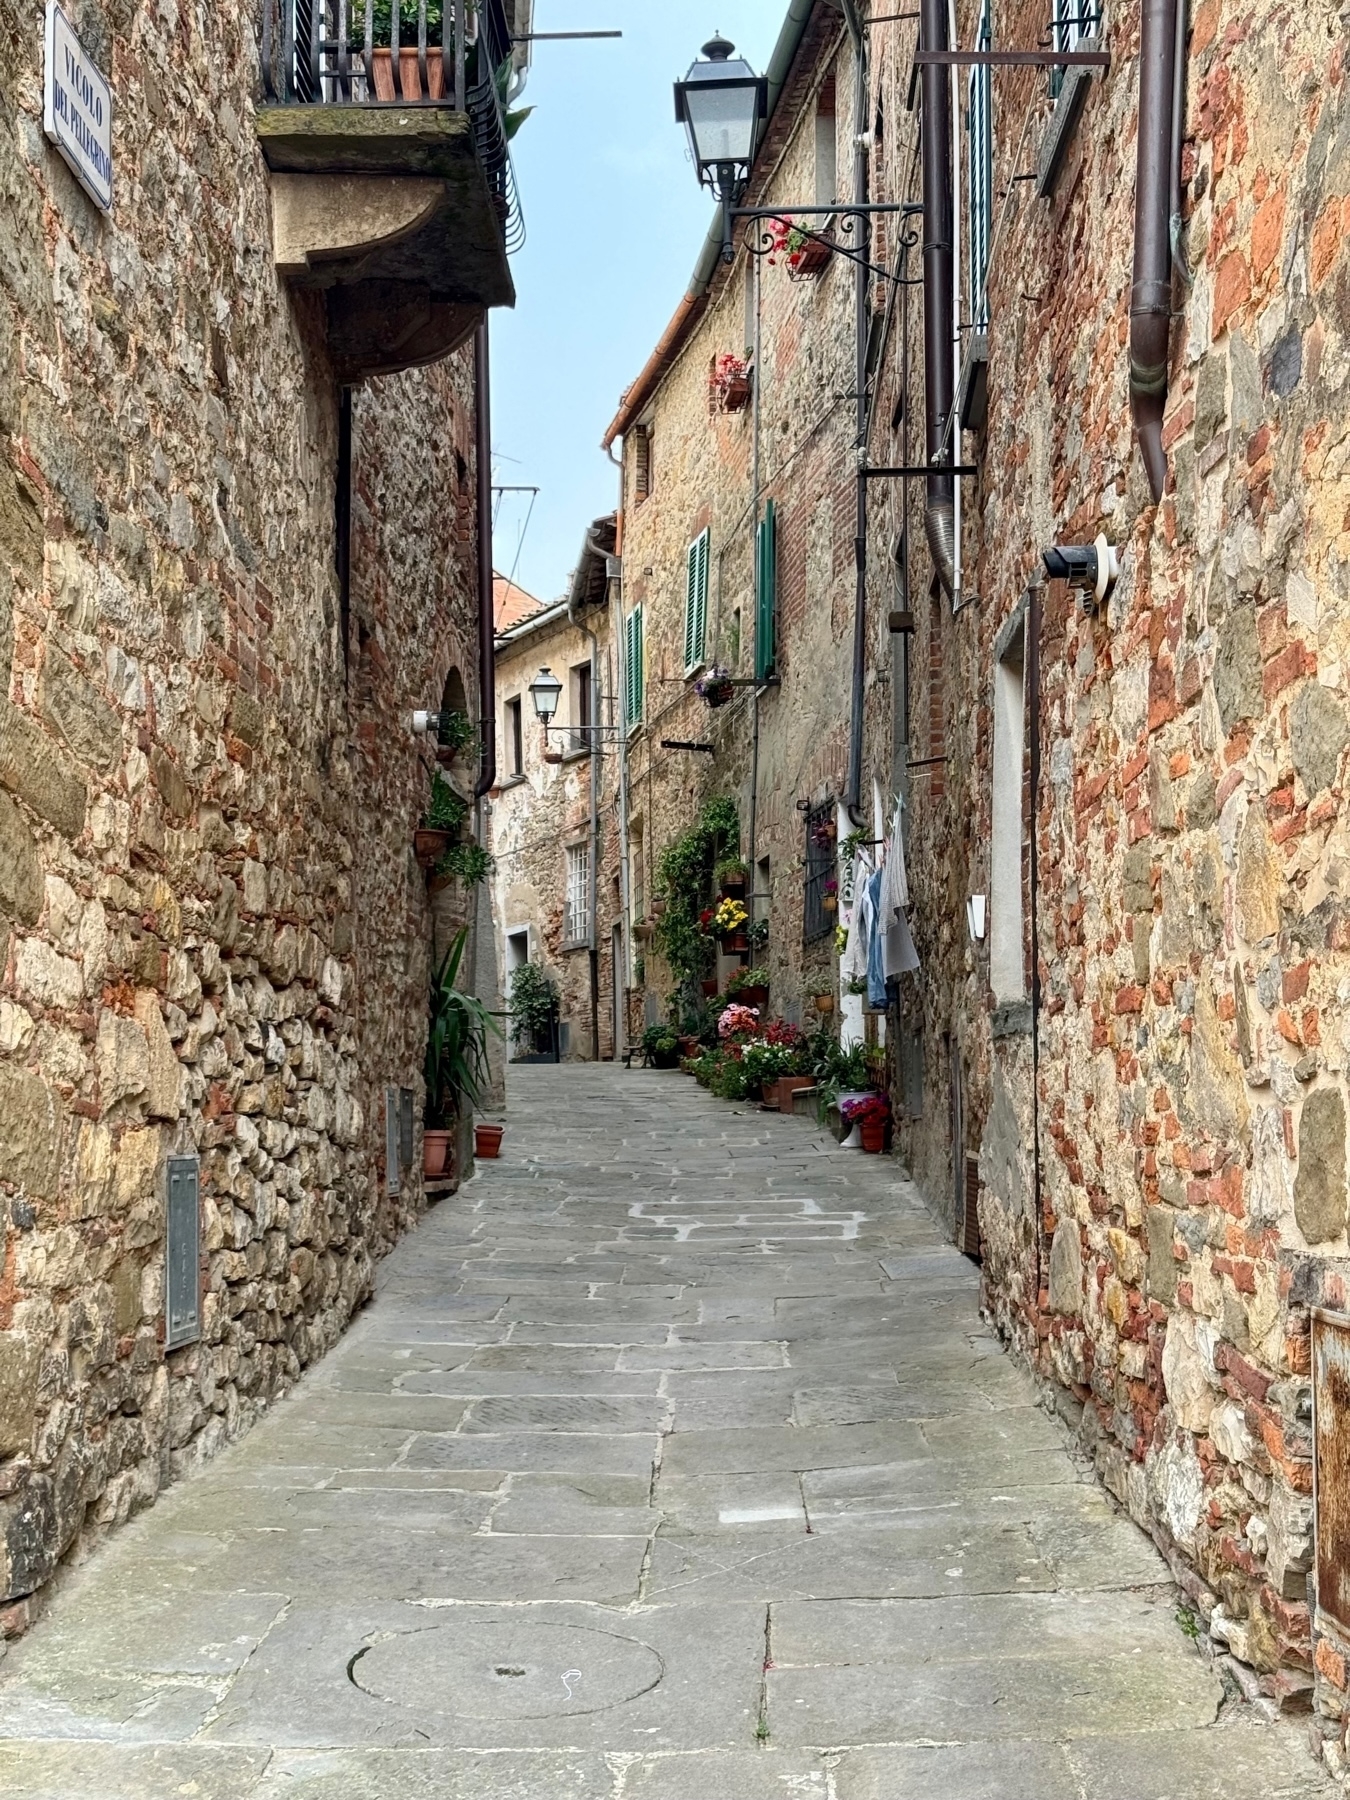 A narrow, stone-paved street in a quaint village or historic town. The street is lined with aged, stone buildings adorned with green window shutters and flower pots. Lamps hang from the sides of buildings. 